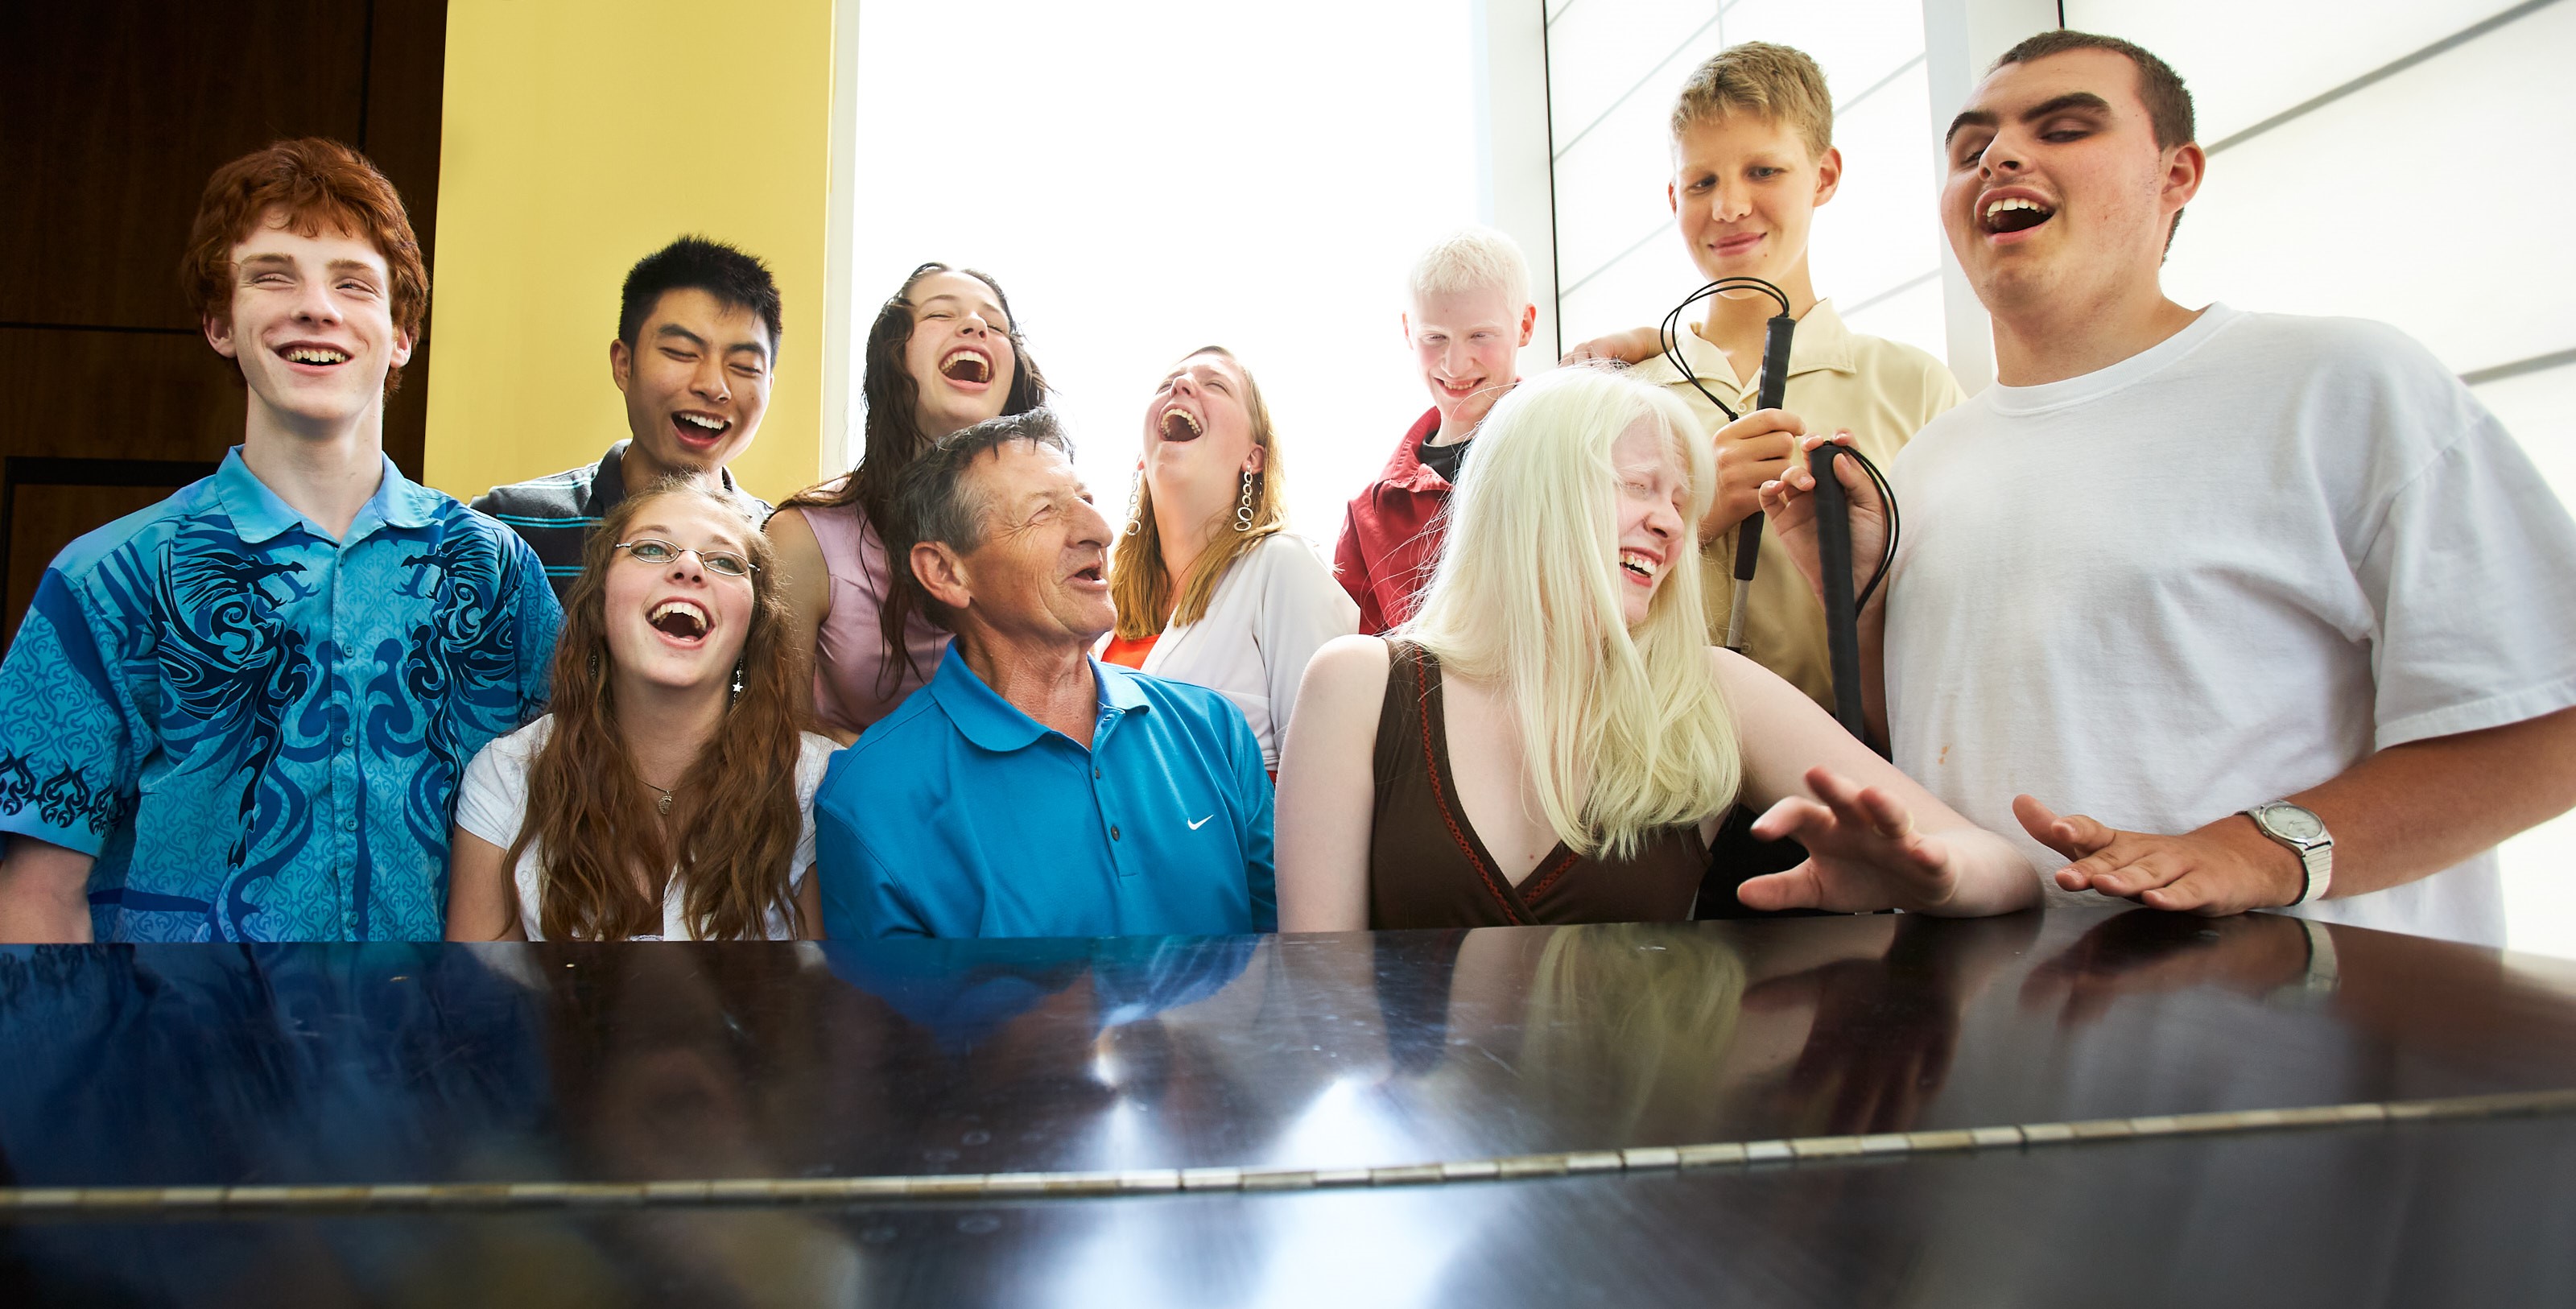 Walter Gretzky sits at a grand piano surrounded by 8 youth with sight loss. They are smiling and excitedly singing a tune while Walter plays the piano.